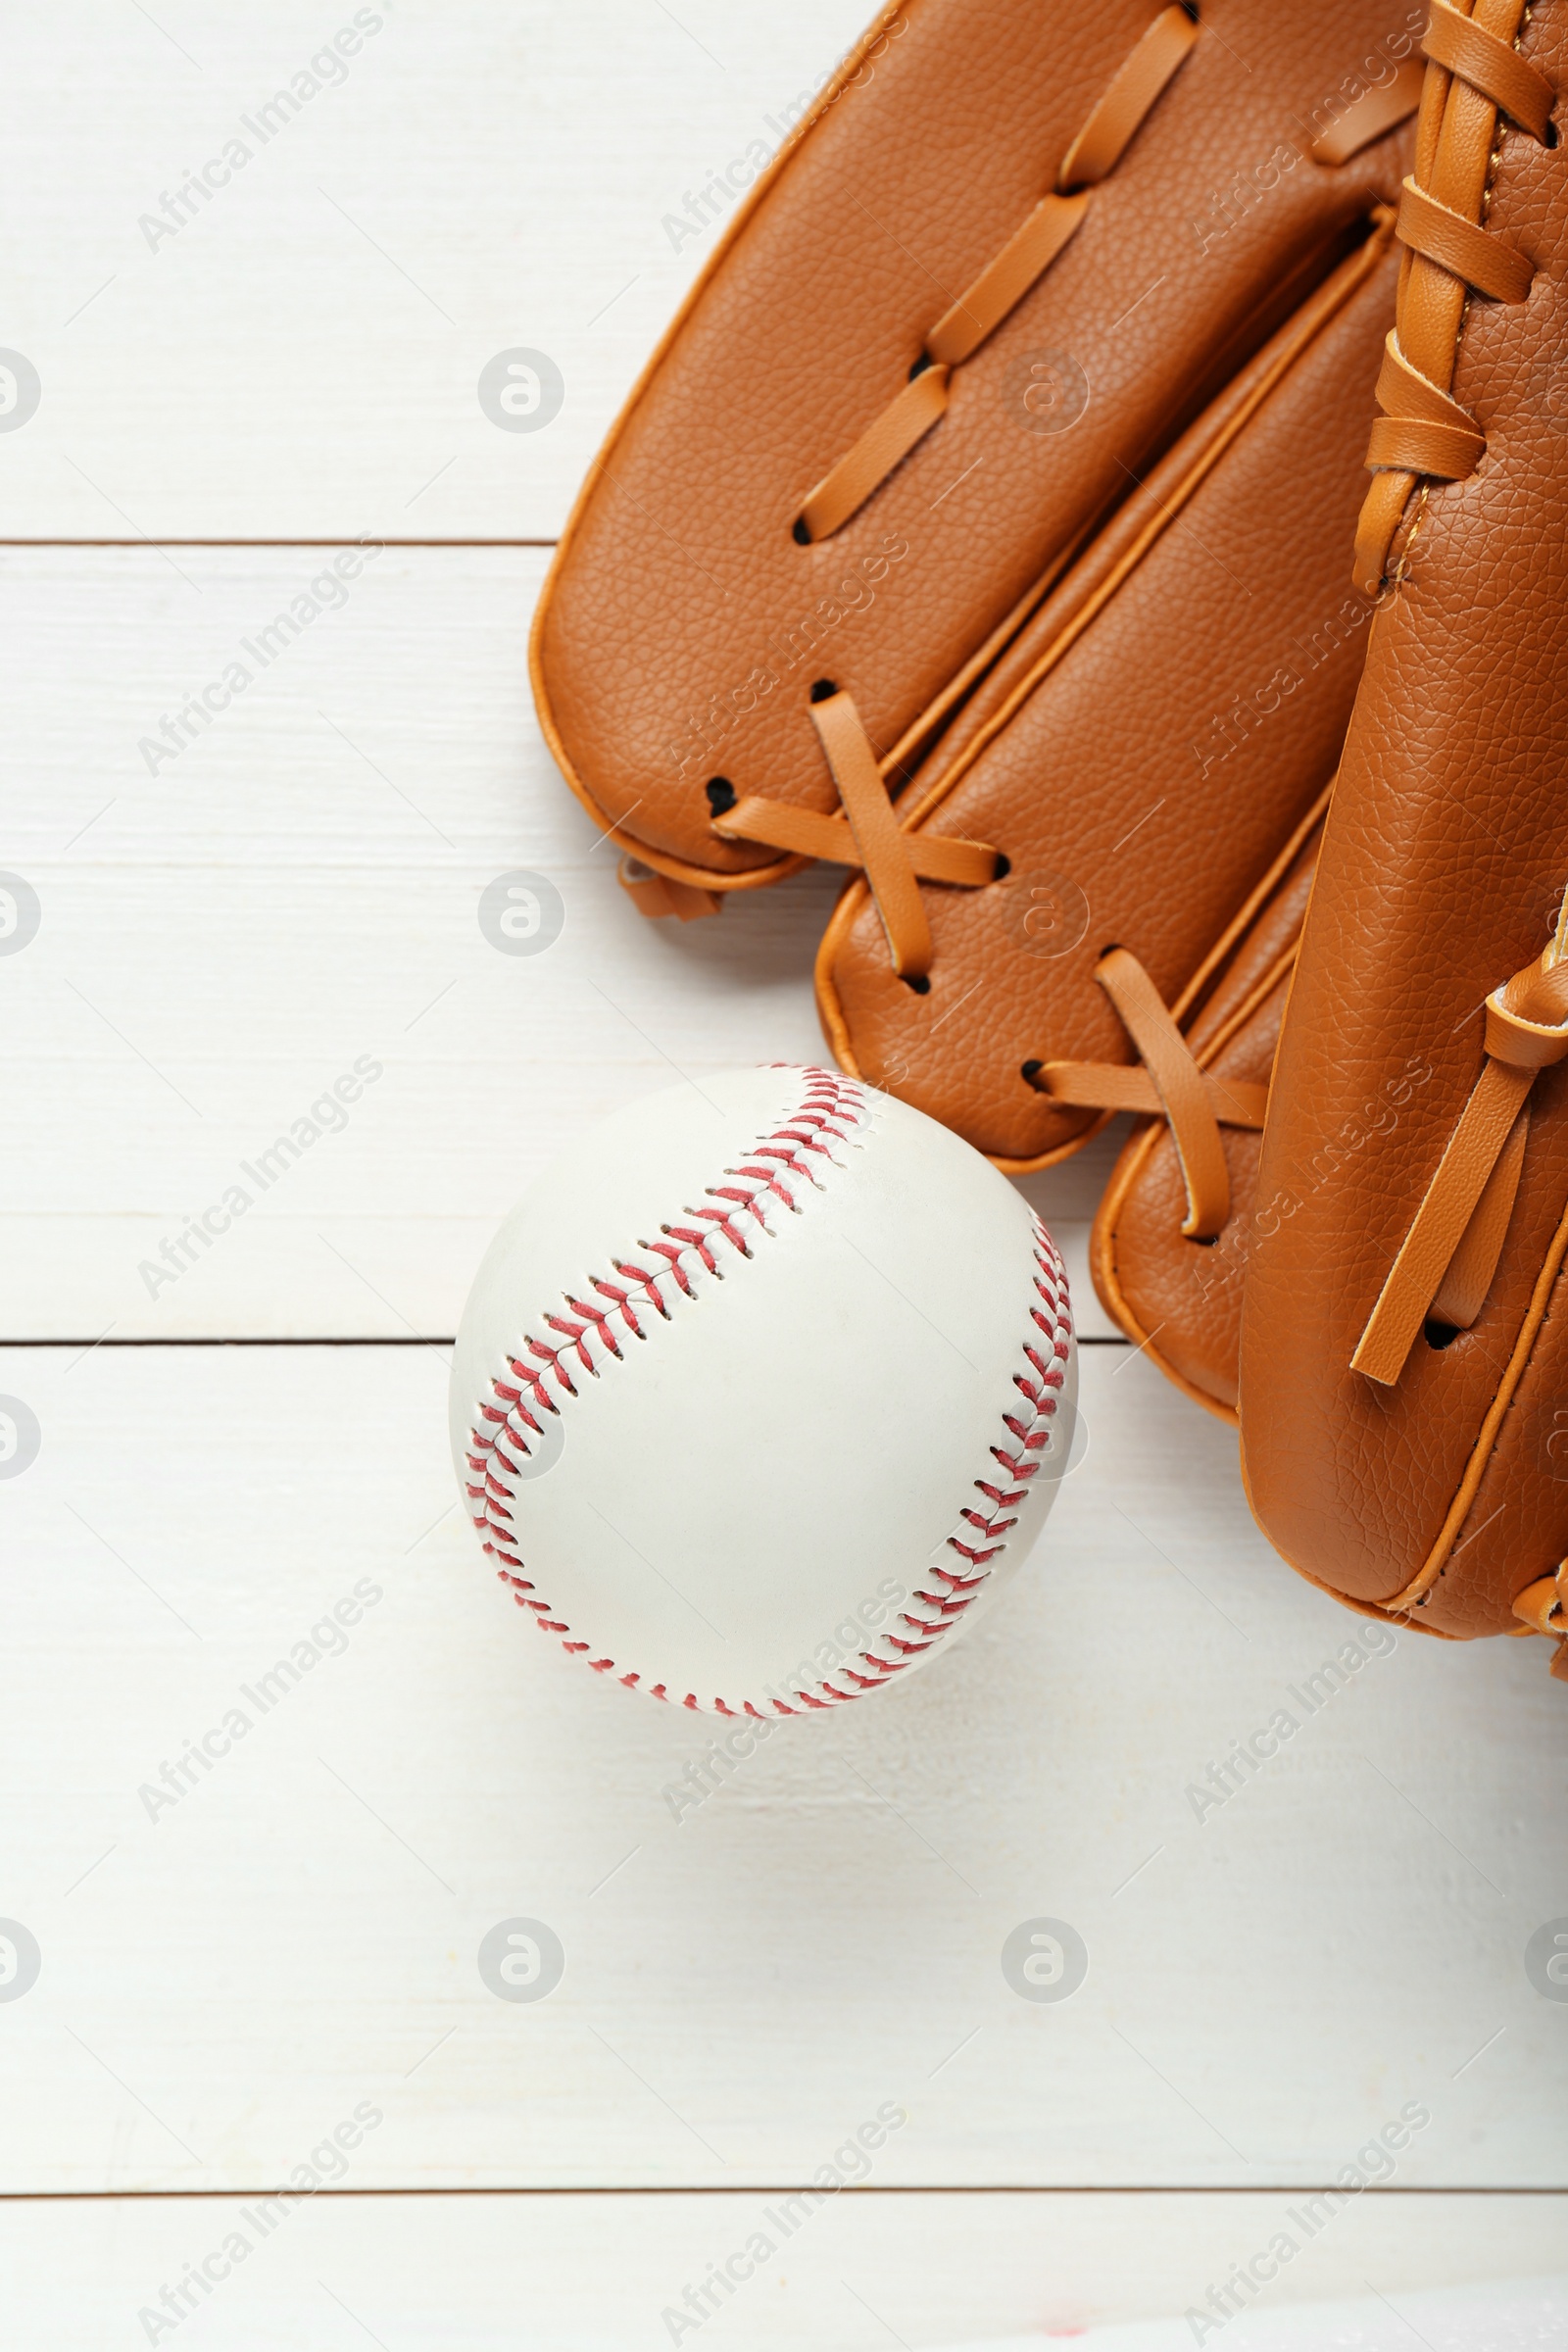 Photo of Catcher's mitt and baseball ball on white wooden table, top view. Sports game